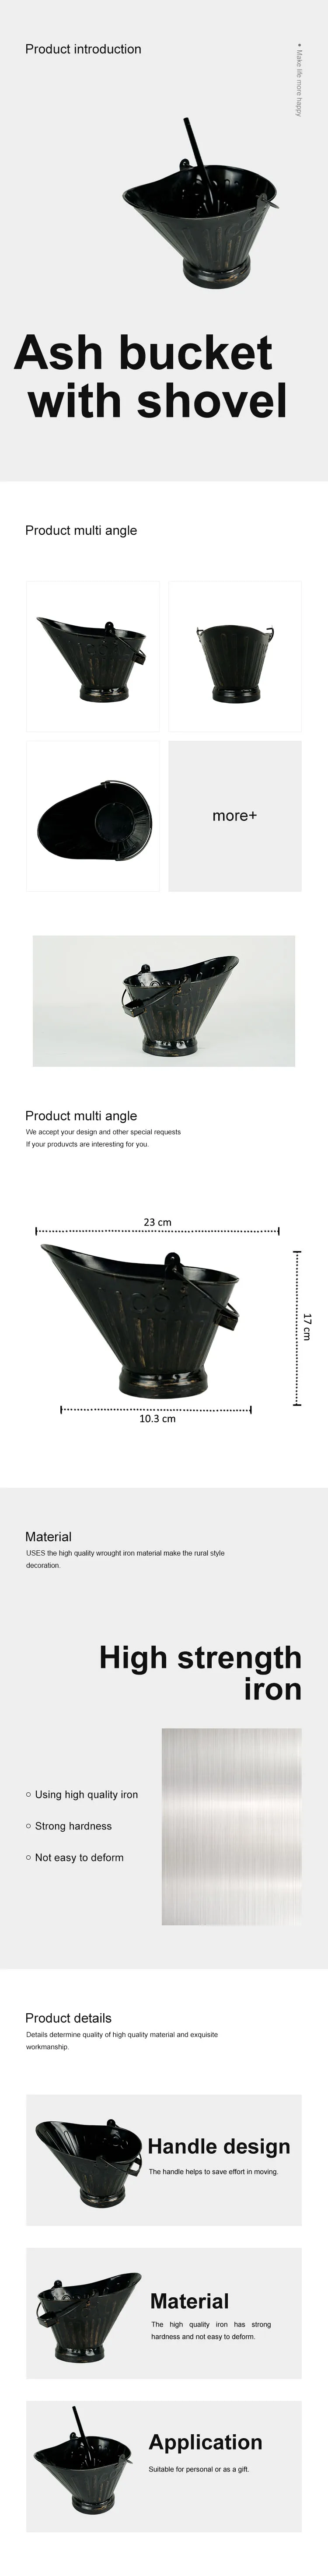 Ash Bucket with Shovel Galvanized Metal Coal hod and Hot Ash Pail Container Tools for Fireplace Hearth bucket